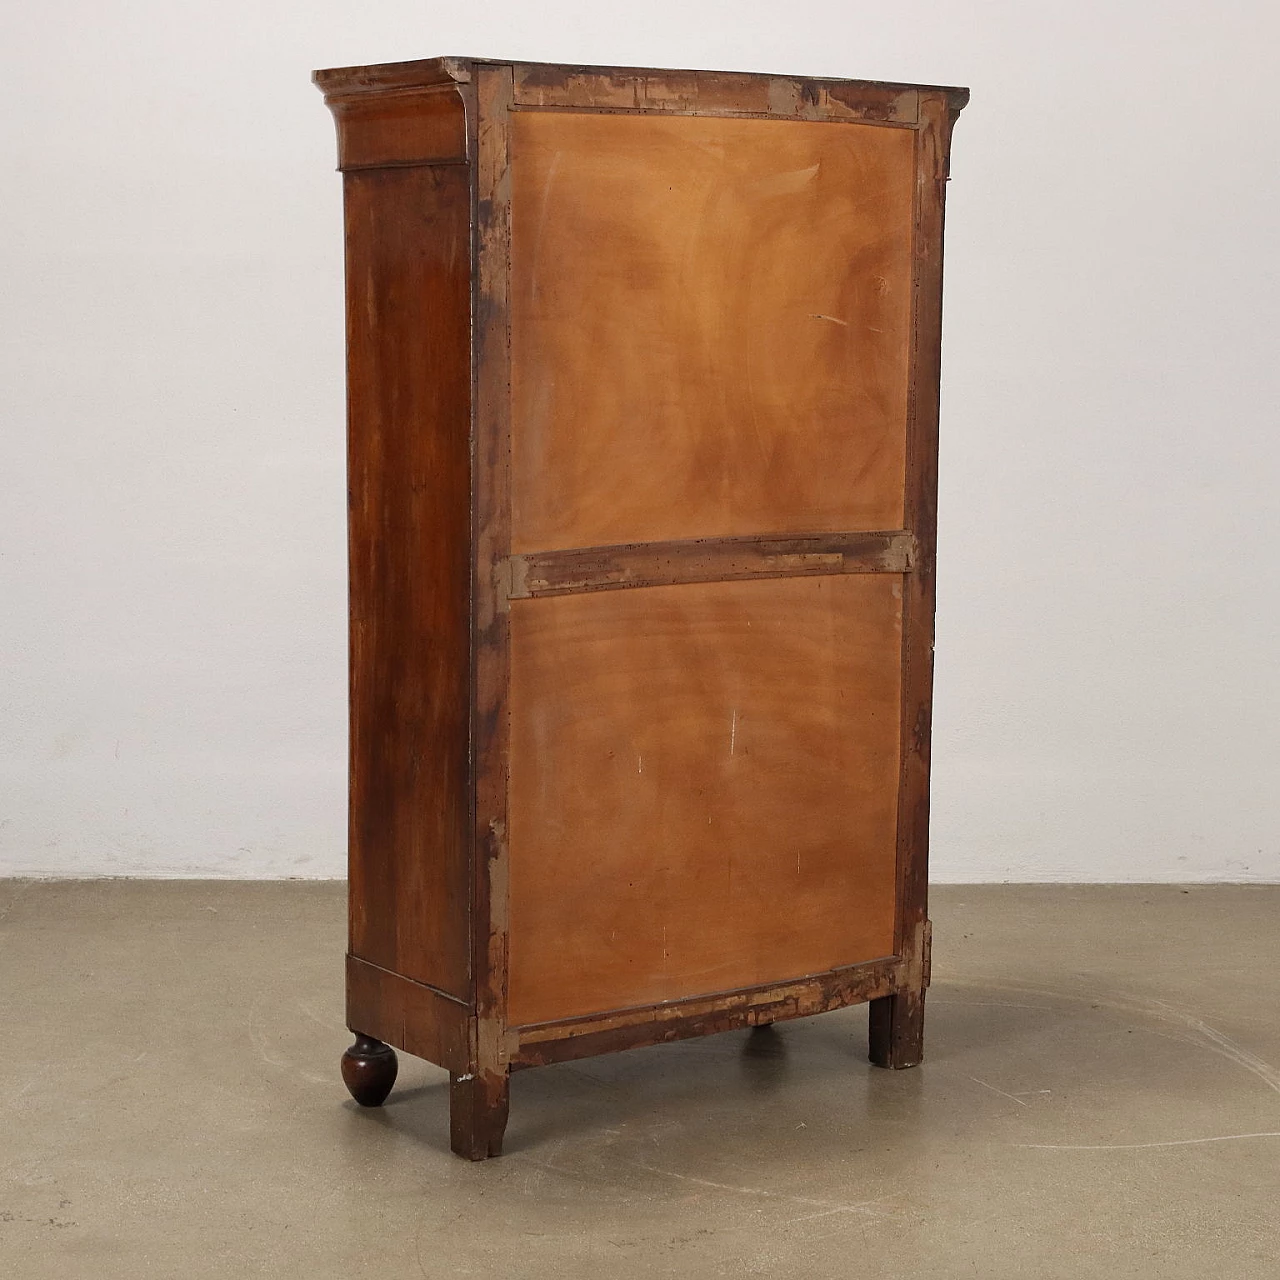 Walnut secrétaire with drawers and flap door, 19th century 10